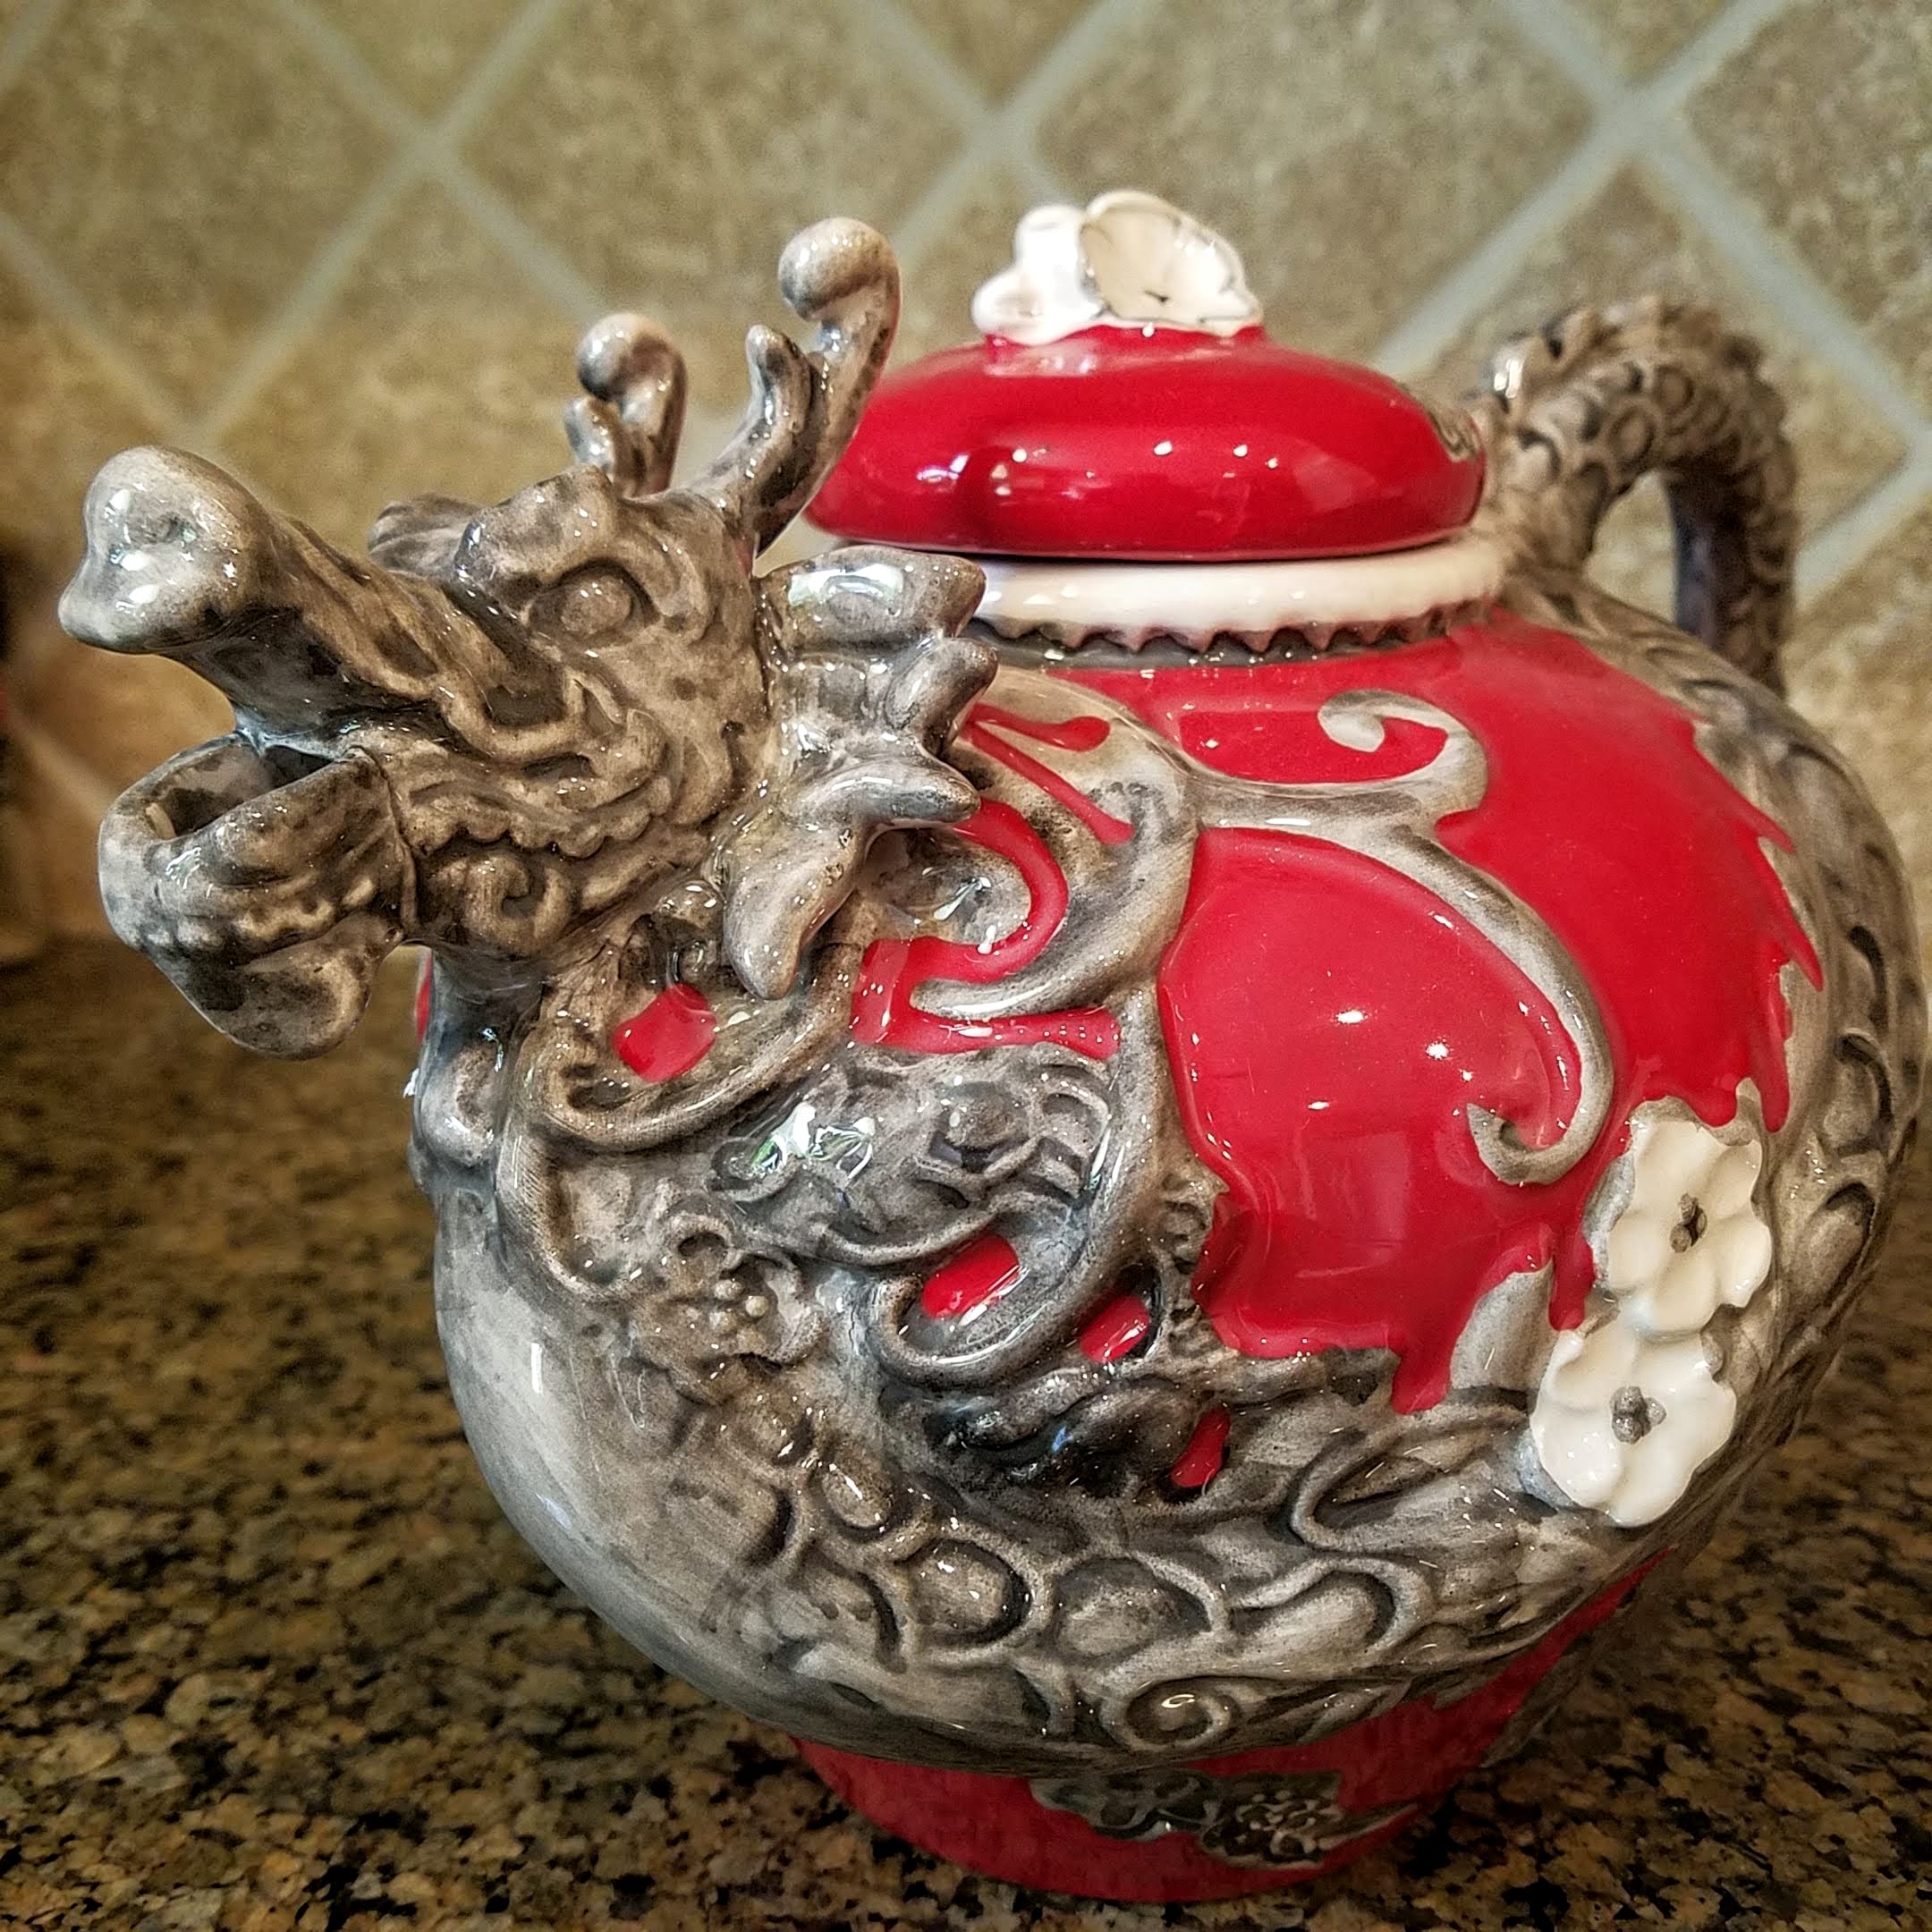 This Red Dragon Teapot Decorative Collectible Kitchen Décor Heather Goldminc Blue Sky is made with love by Premier Homegoods! Shop more unique gift ideas today with Spots Initiatives, the best way to support creators.